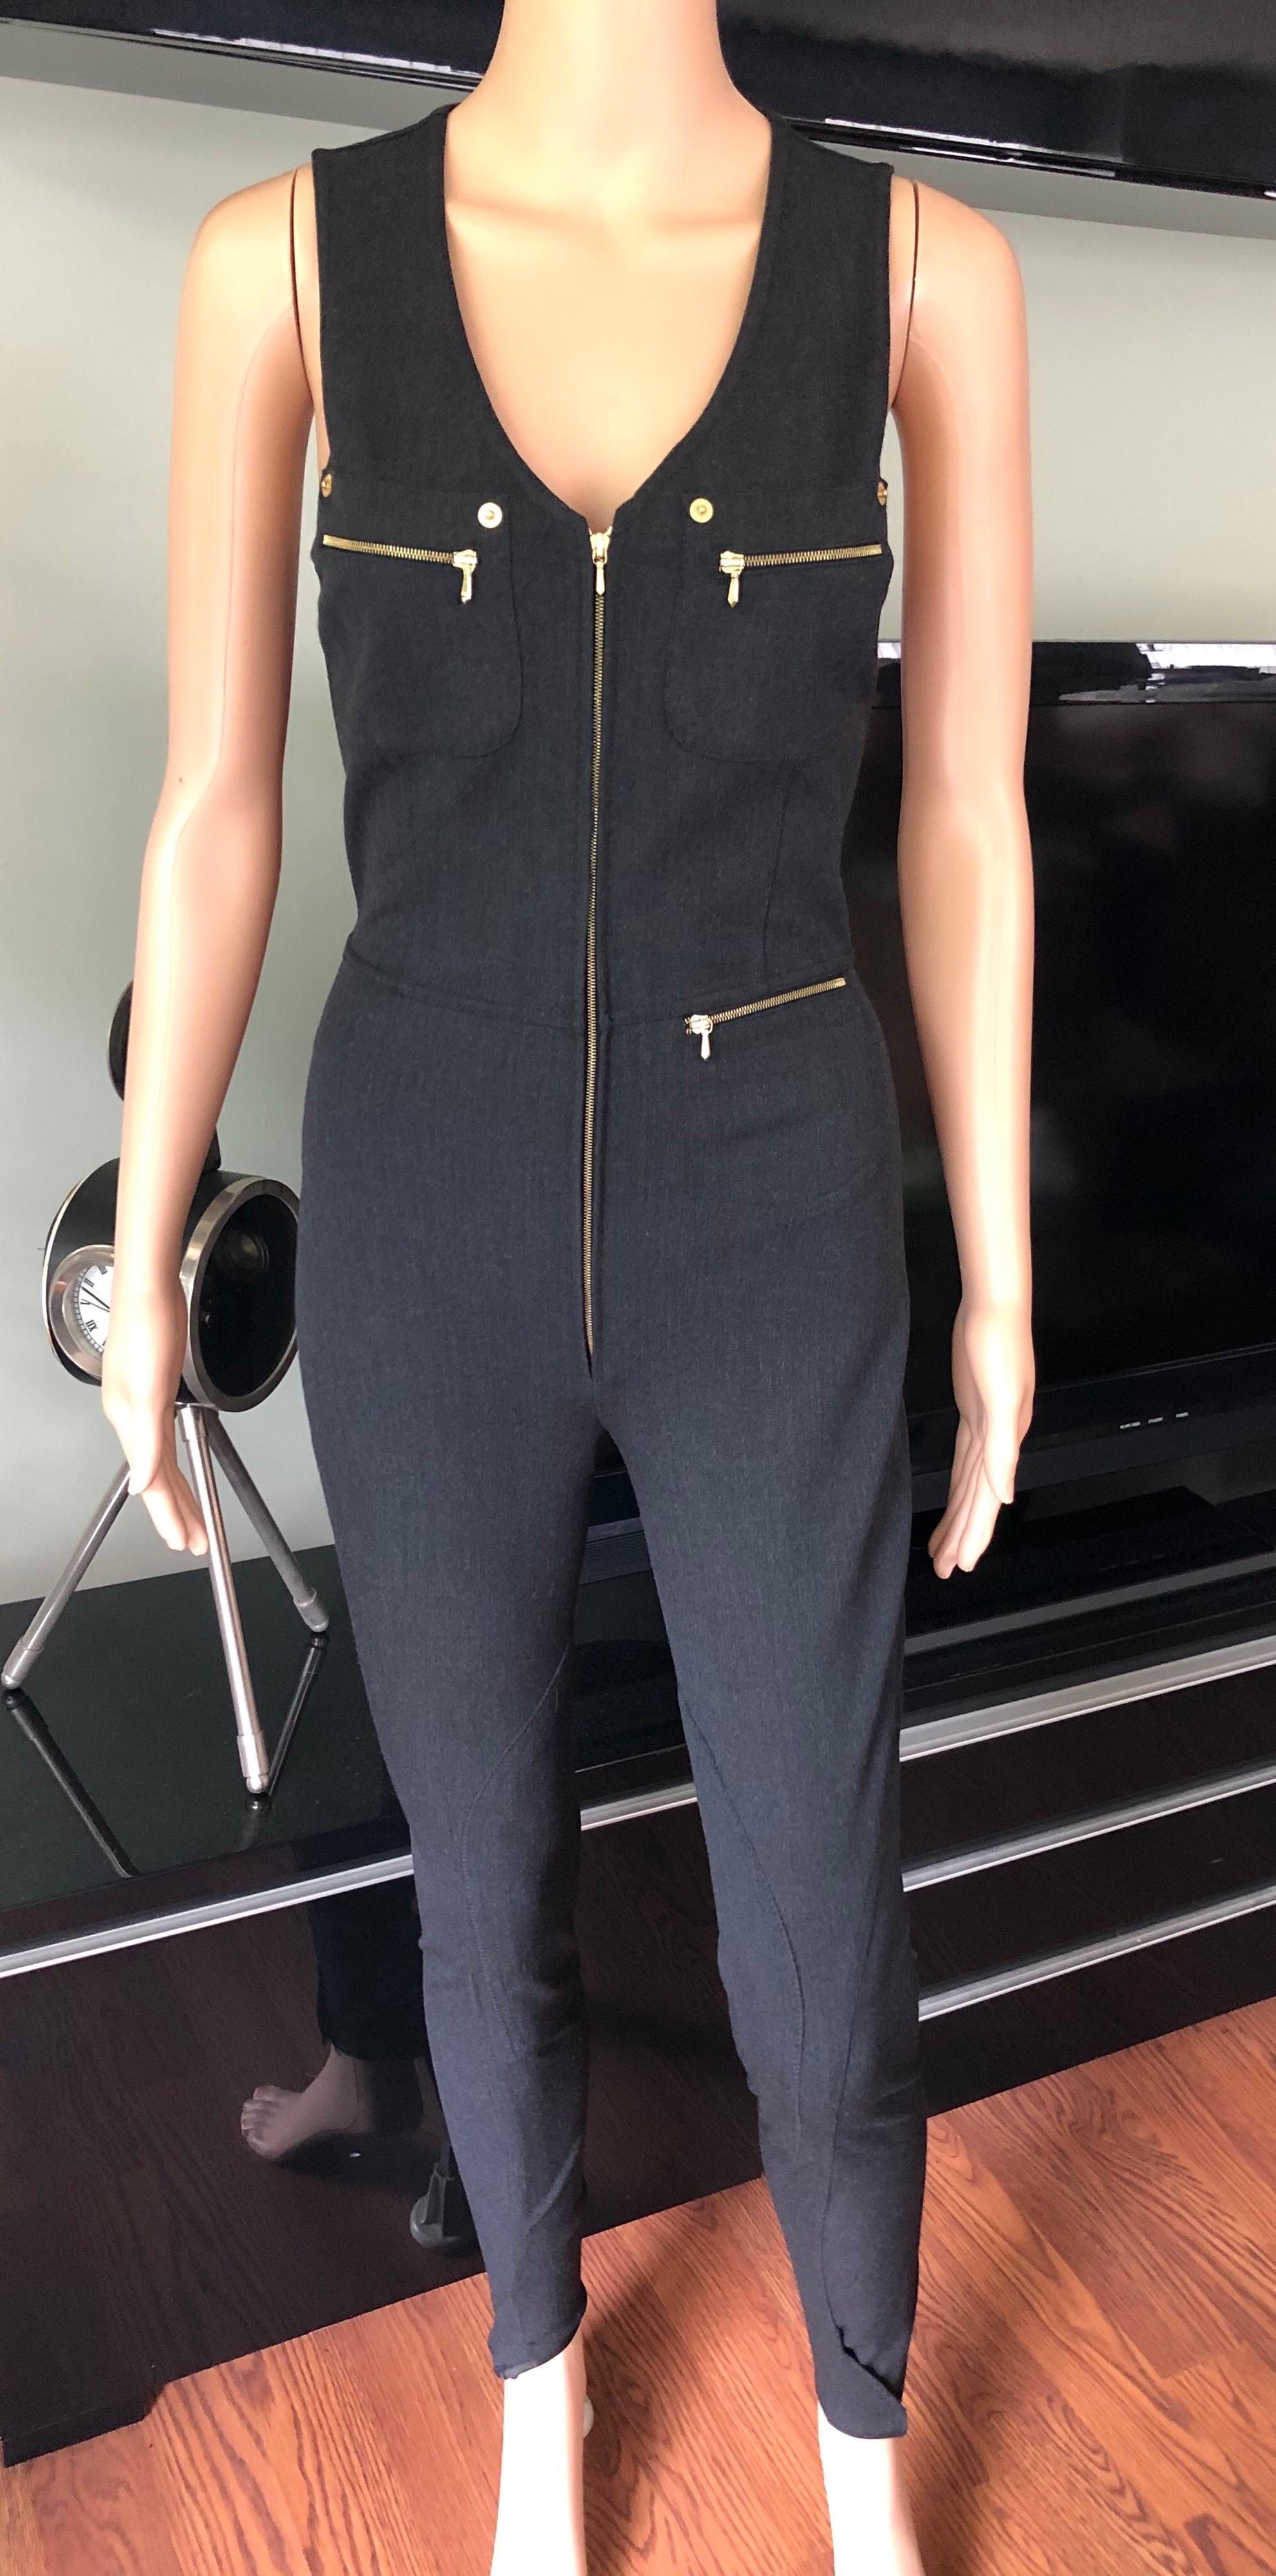 Tom Ford for Gucci S/S 1993 Runway Vintage Zipper Jumpsuit IT 38

Excellent Condition! Like New!